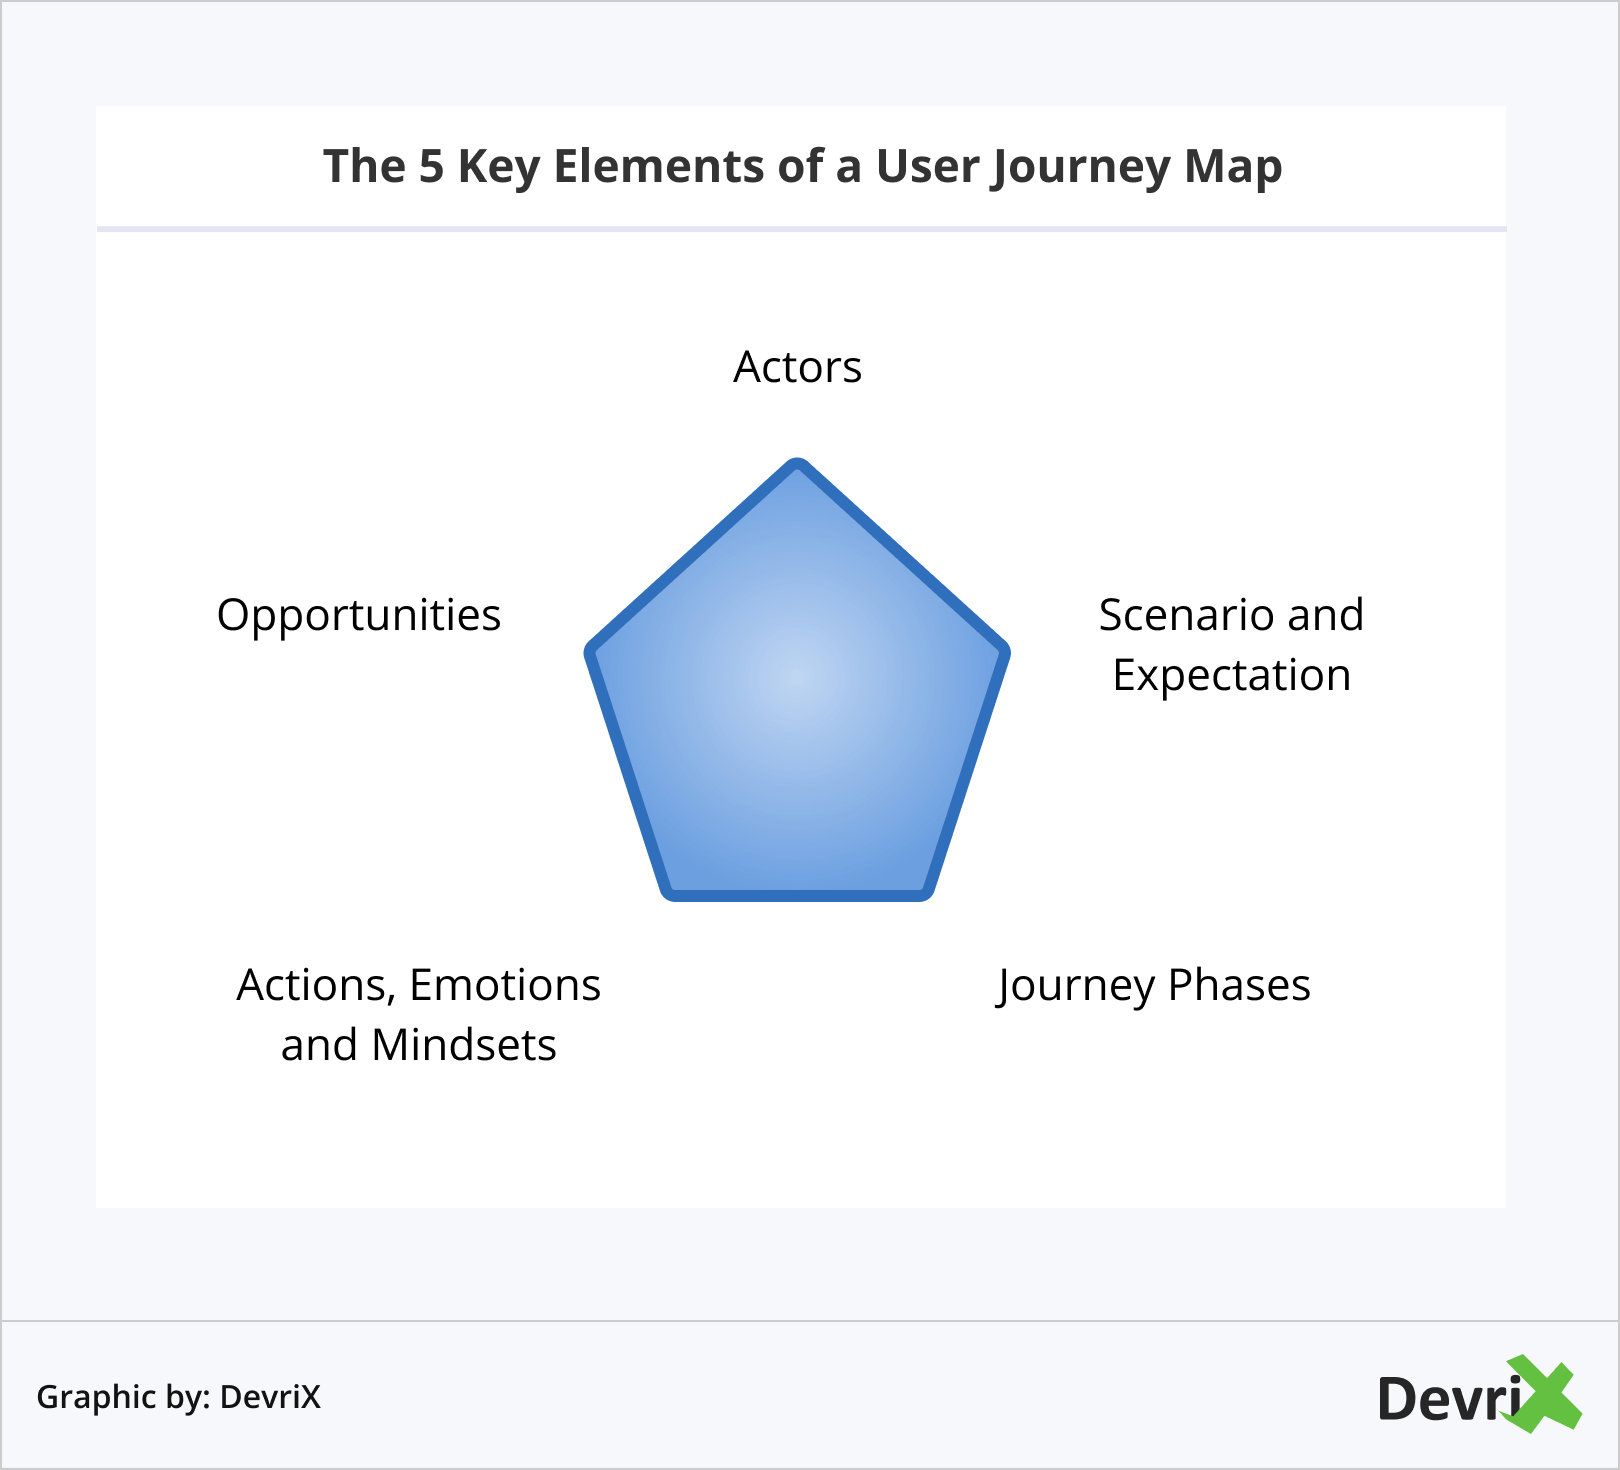 The 5 Key Elements of a User Journey Map